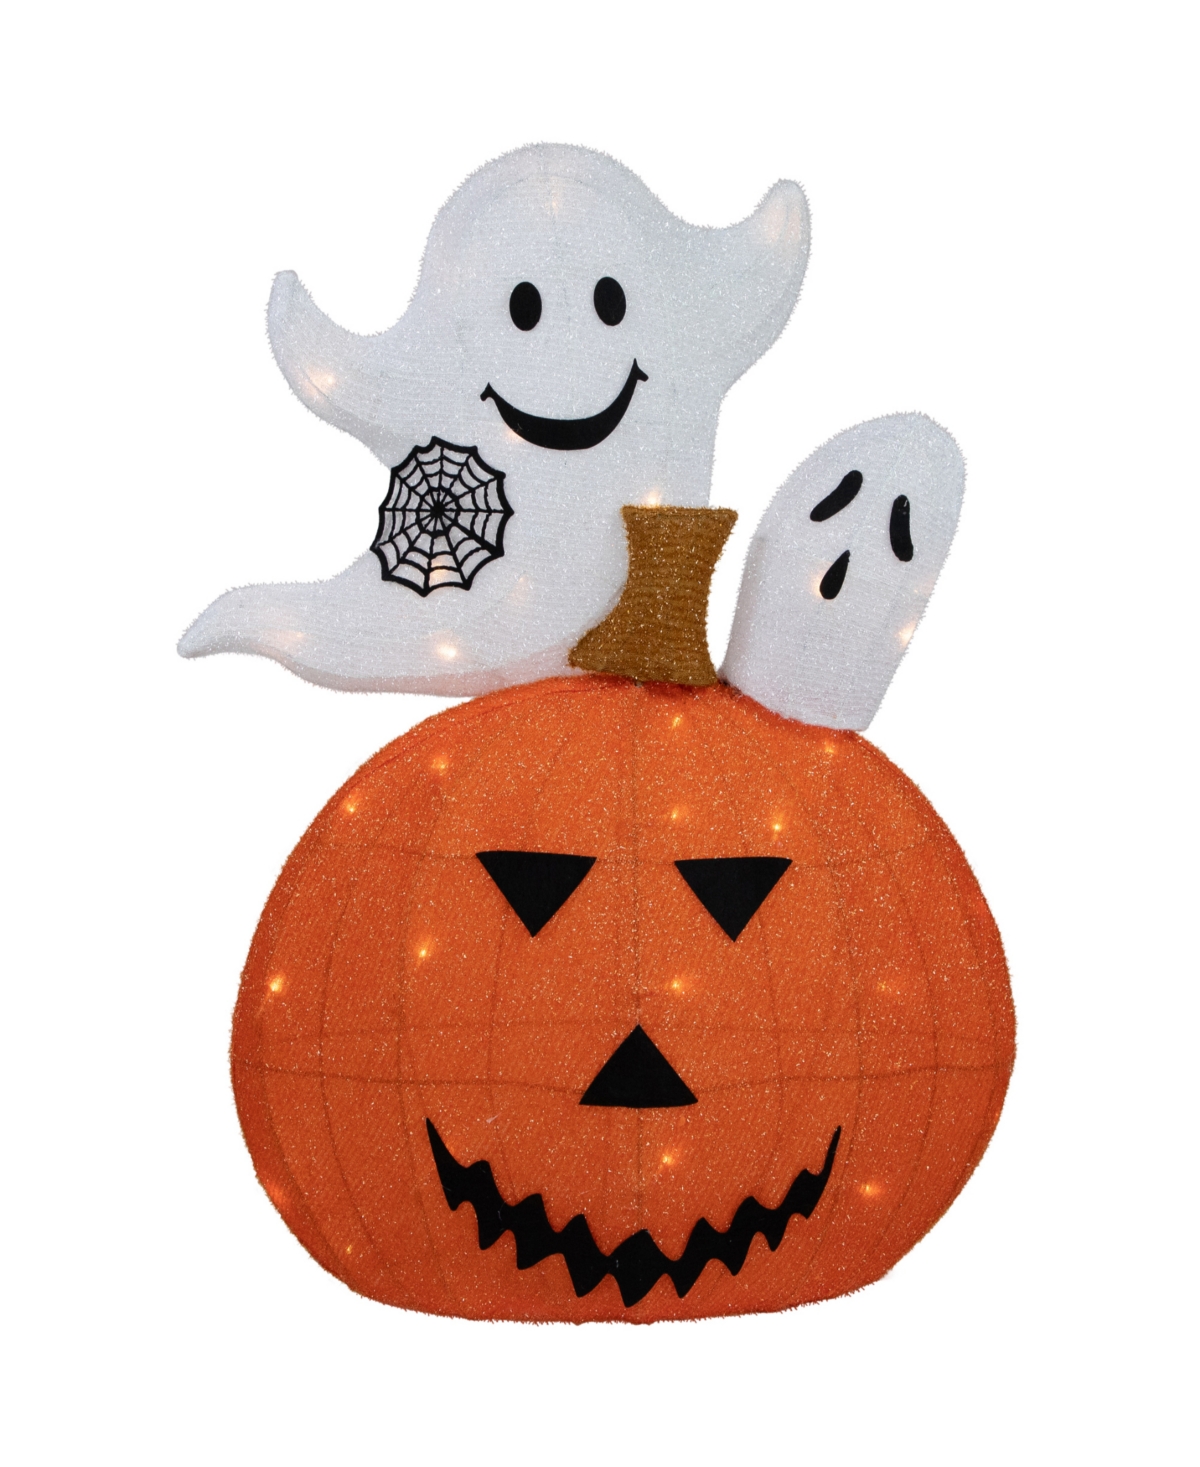 27.5" Led Lighted Battery Operated Jack-o-Lantern and Ghosts Halloween Decoration - Orange